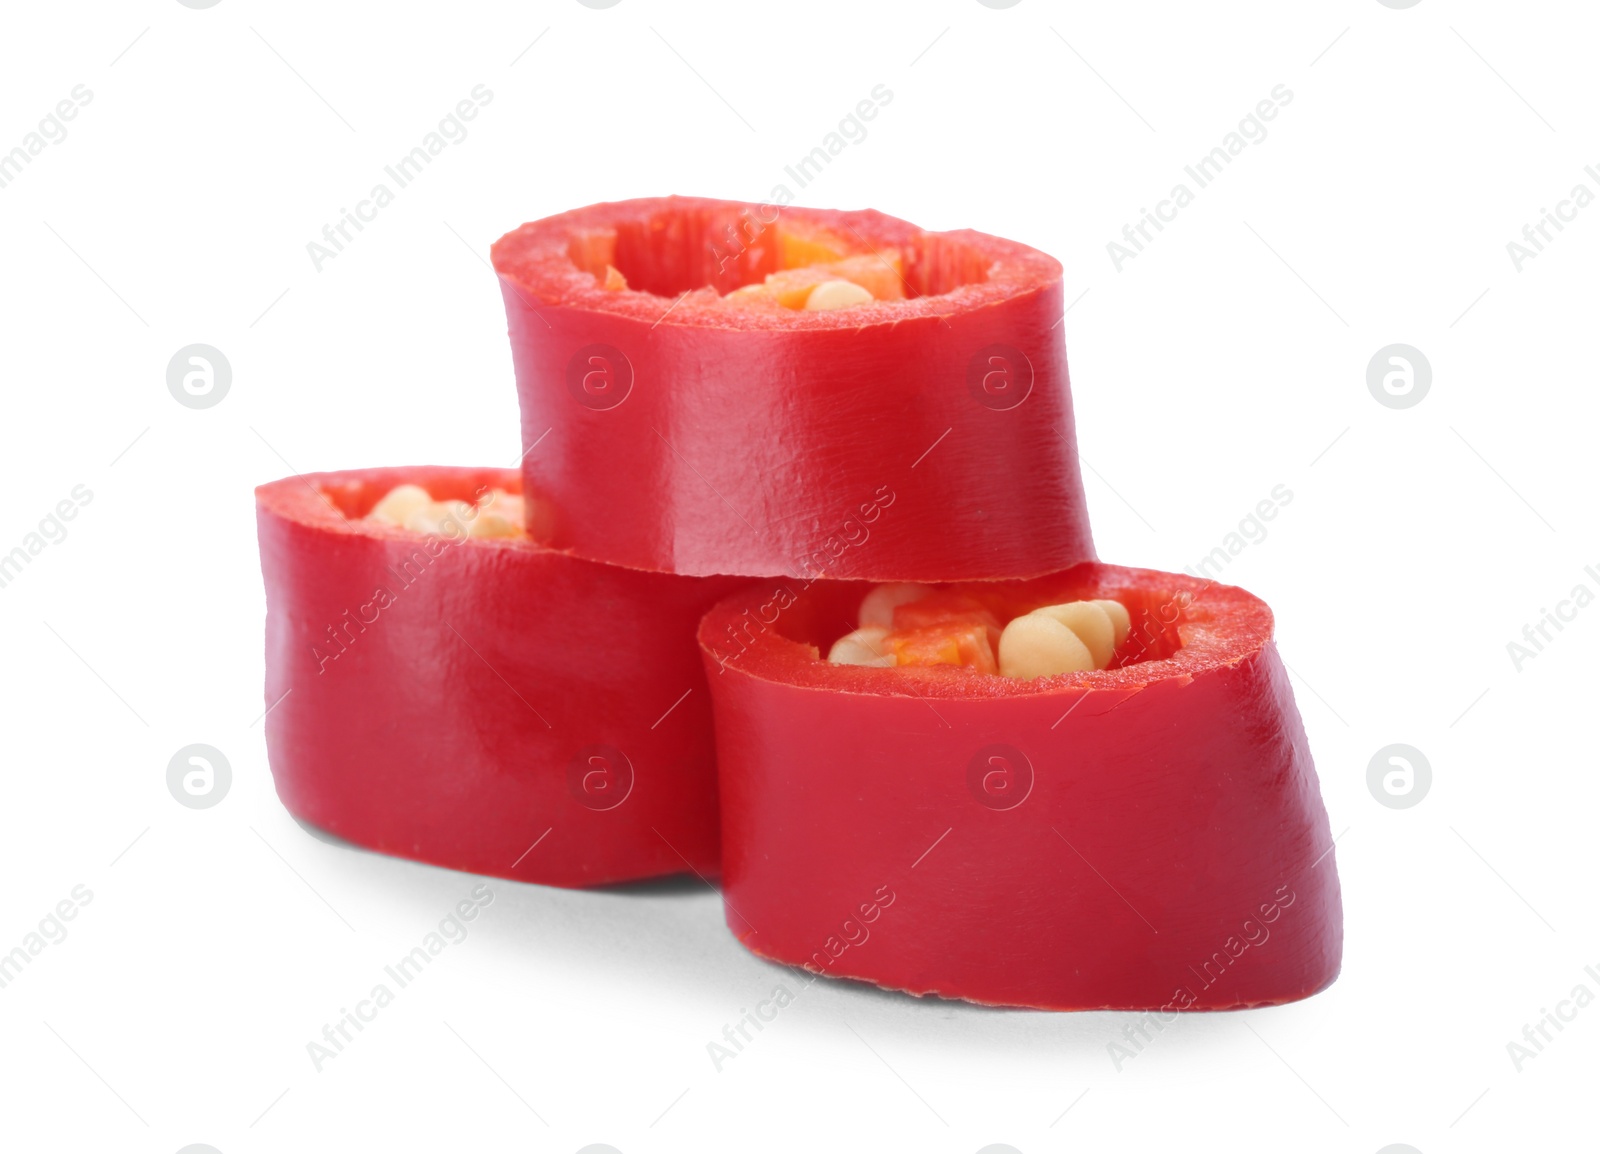 Photo of Slices of red chili pepper on white background